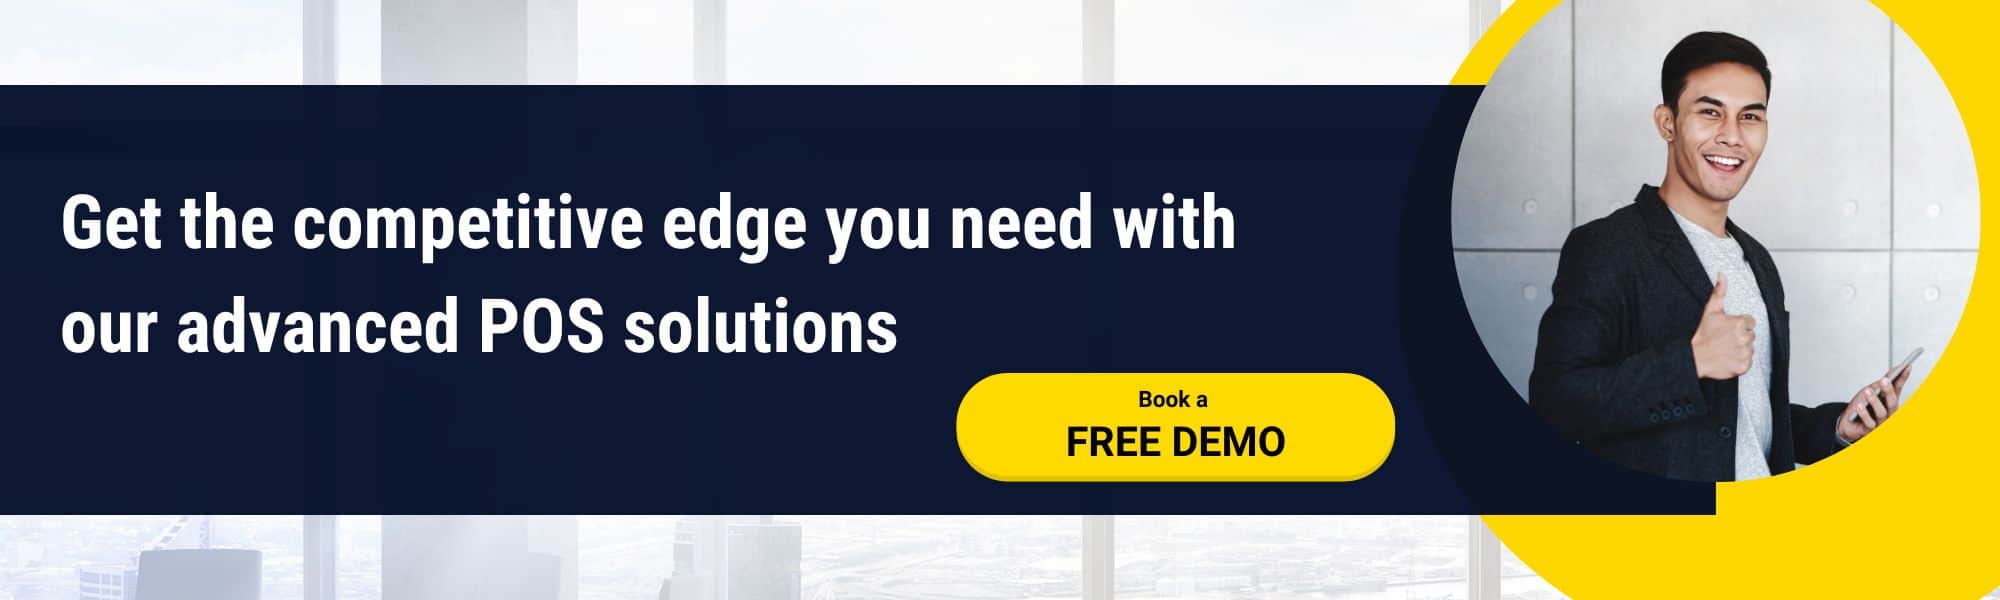 Image of a call to action banner promoting Point of Sale (POS) system. The banner text reads 'Get the Competitive Edge you need with our advanced POS solutions', encouraging businesses to gain an advantage in their market with these solutions